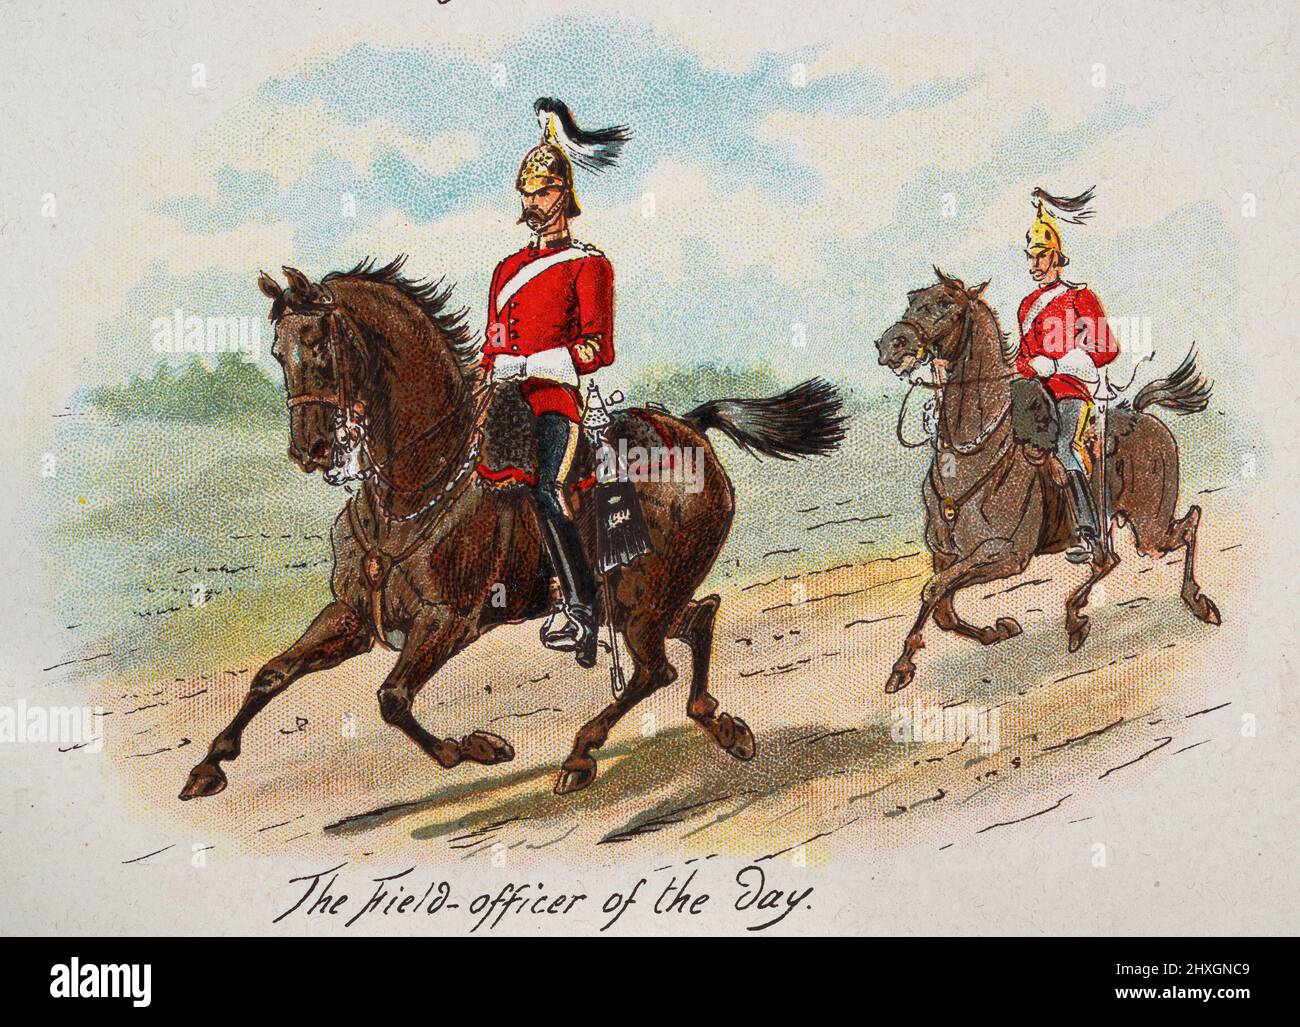 Vintage illustration of Field officer of the day, cavalry, Victorian British Military 19th Century Stock Photo